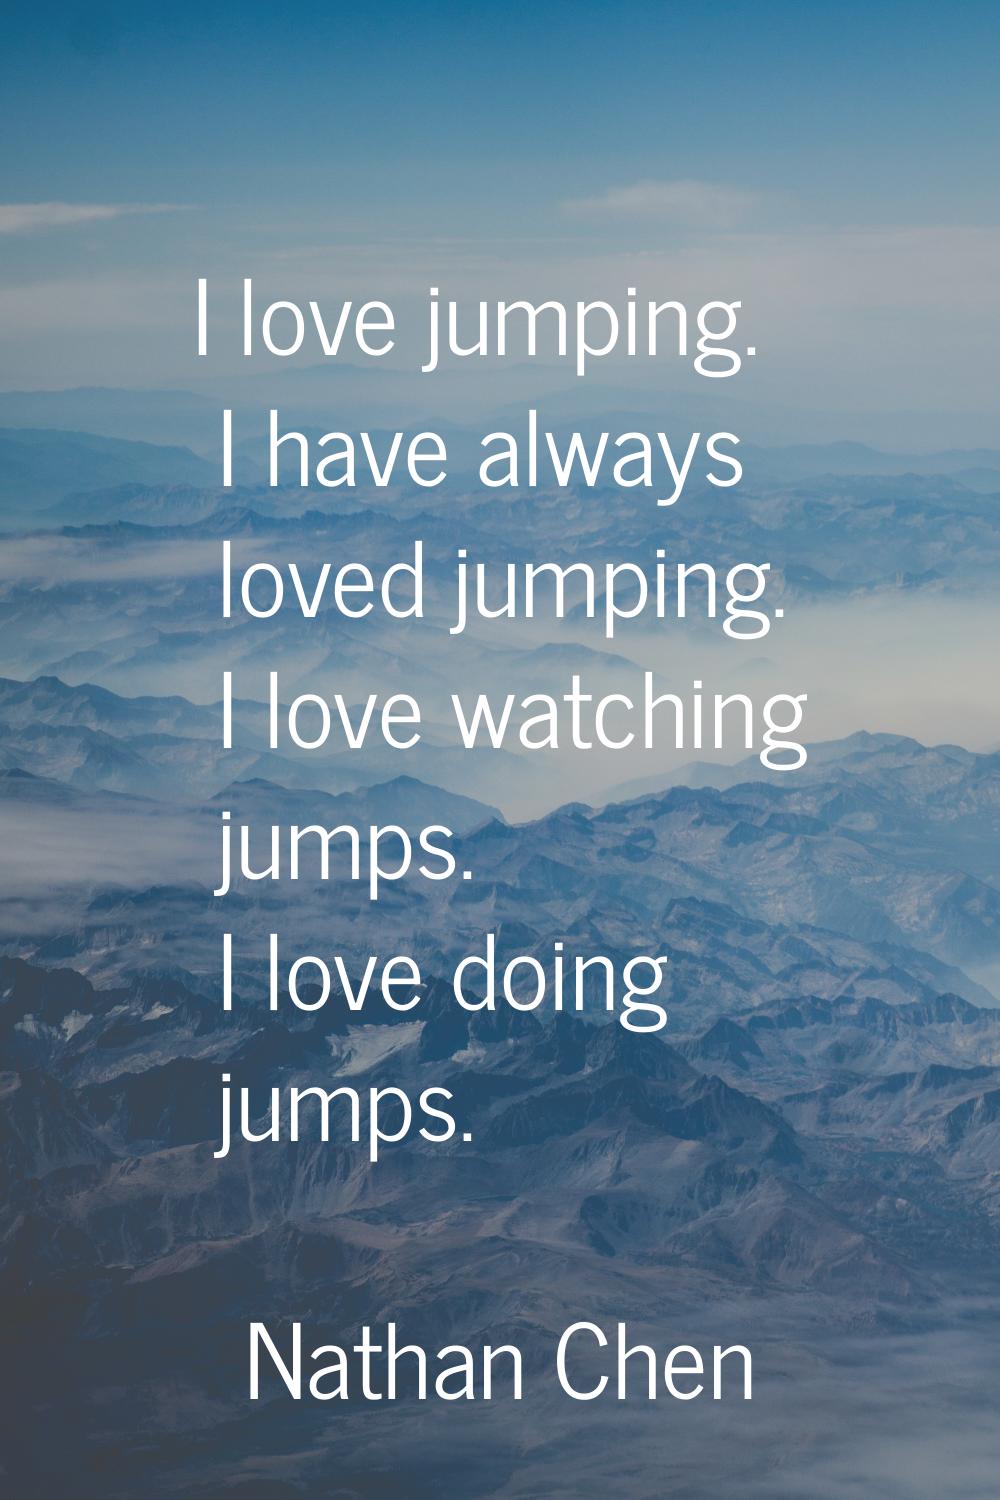 I love jumping. I have always loved jumping. I love watching jumps. I love doing jumps.